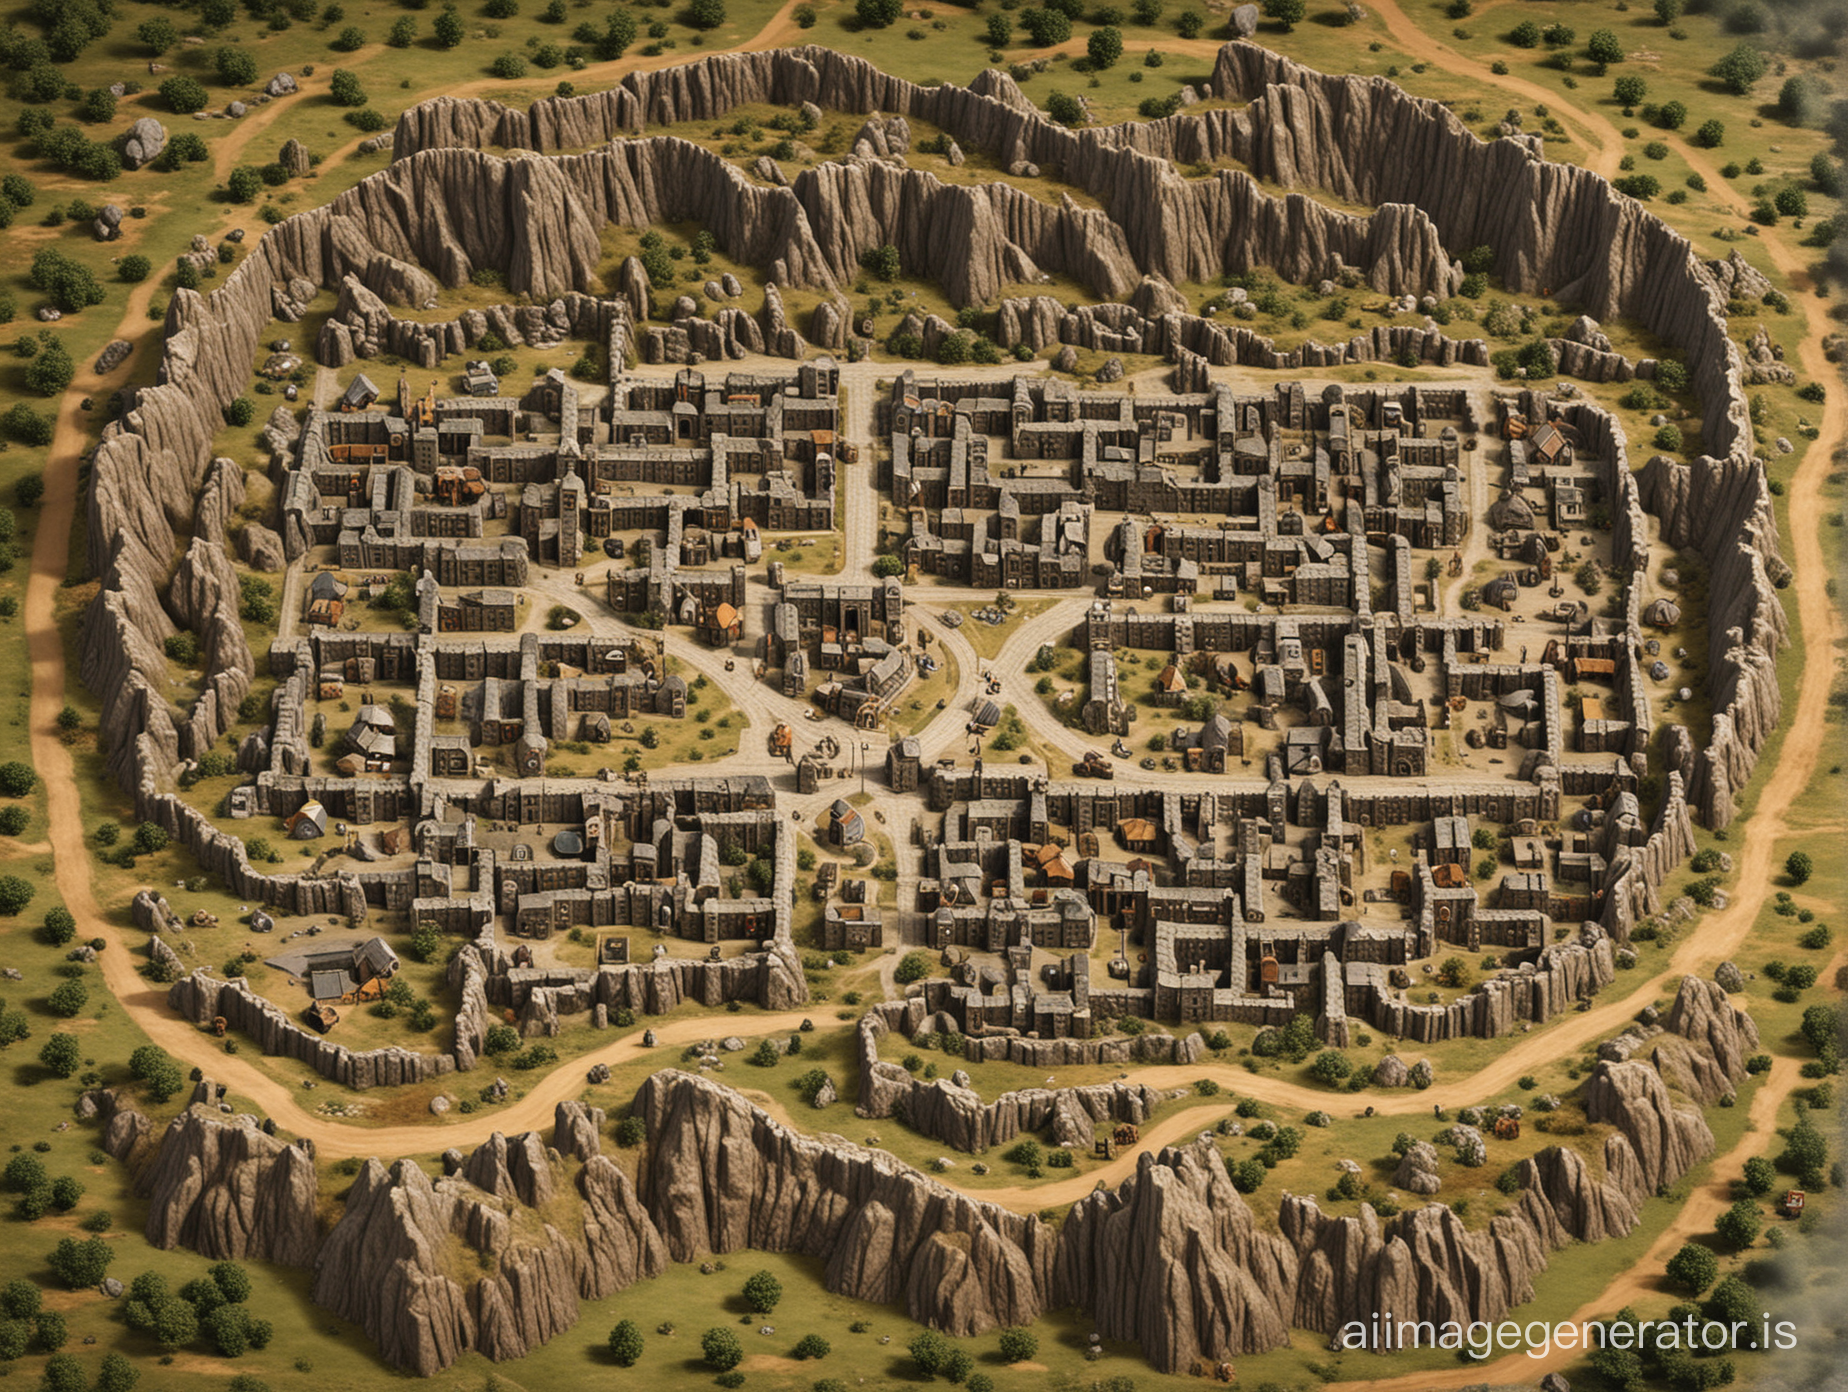 Make a town for a dnd map named copperton with 12 buildings with a central statue in the middle with a cave entrance somewhere around the edge of the map small town on a flat land